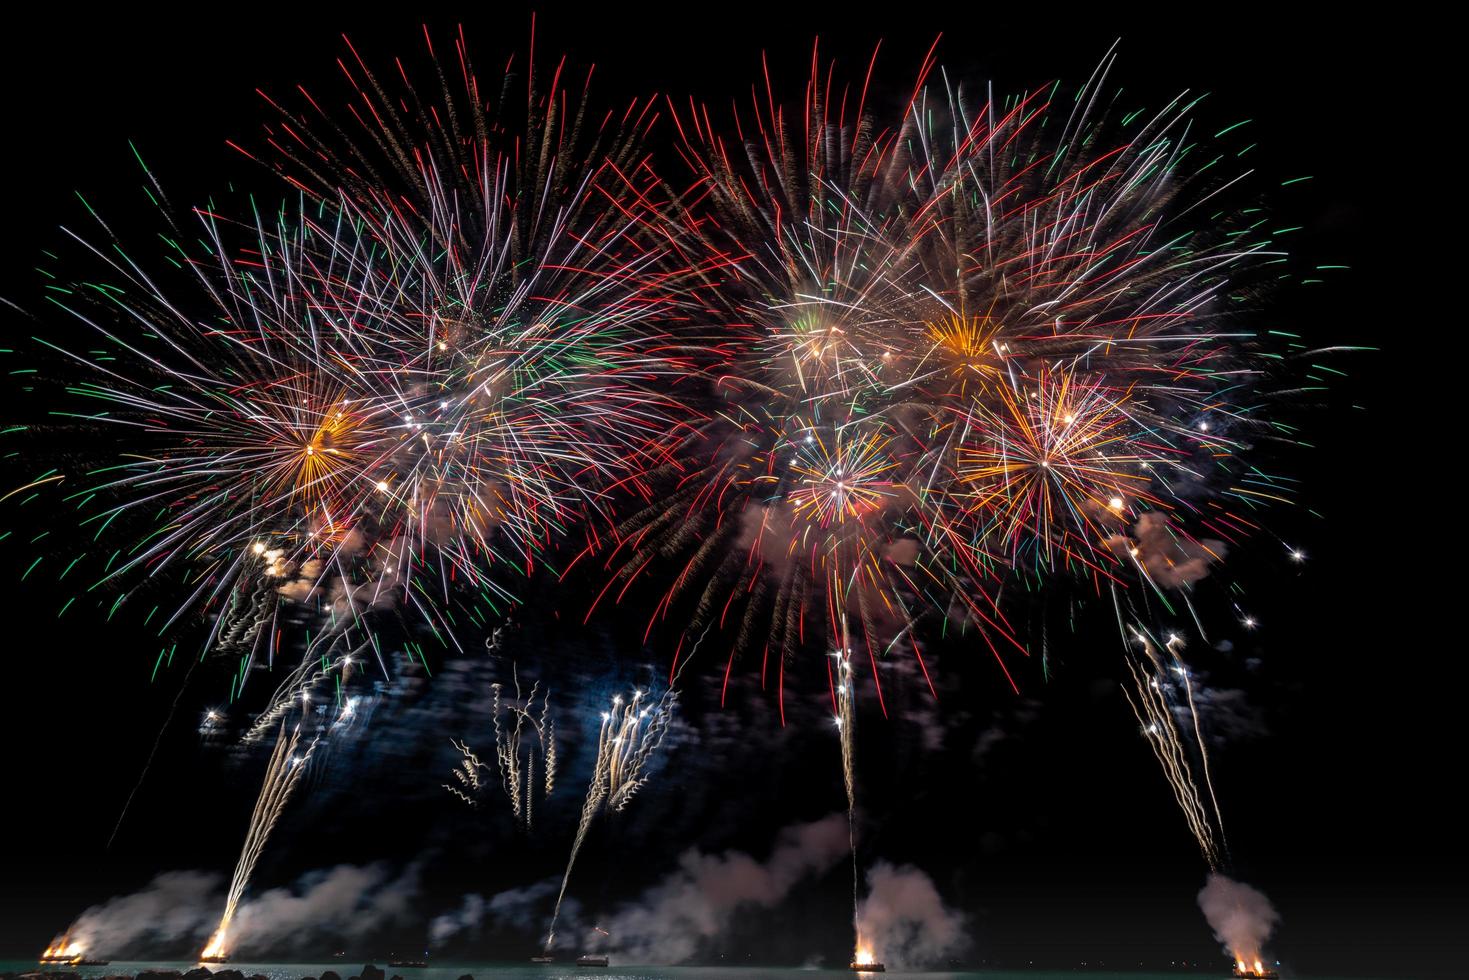 Multicolored fireworks in the sky photo